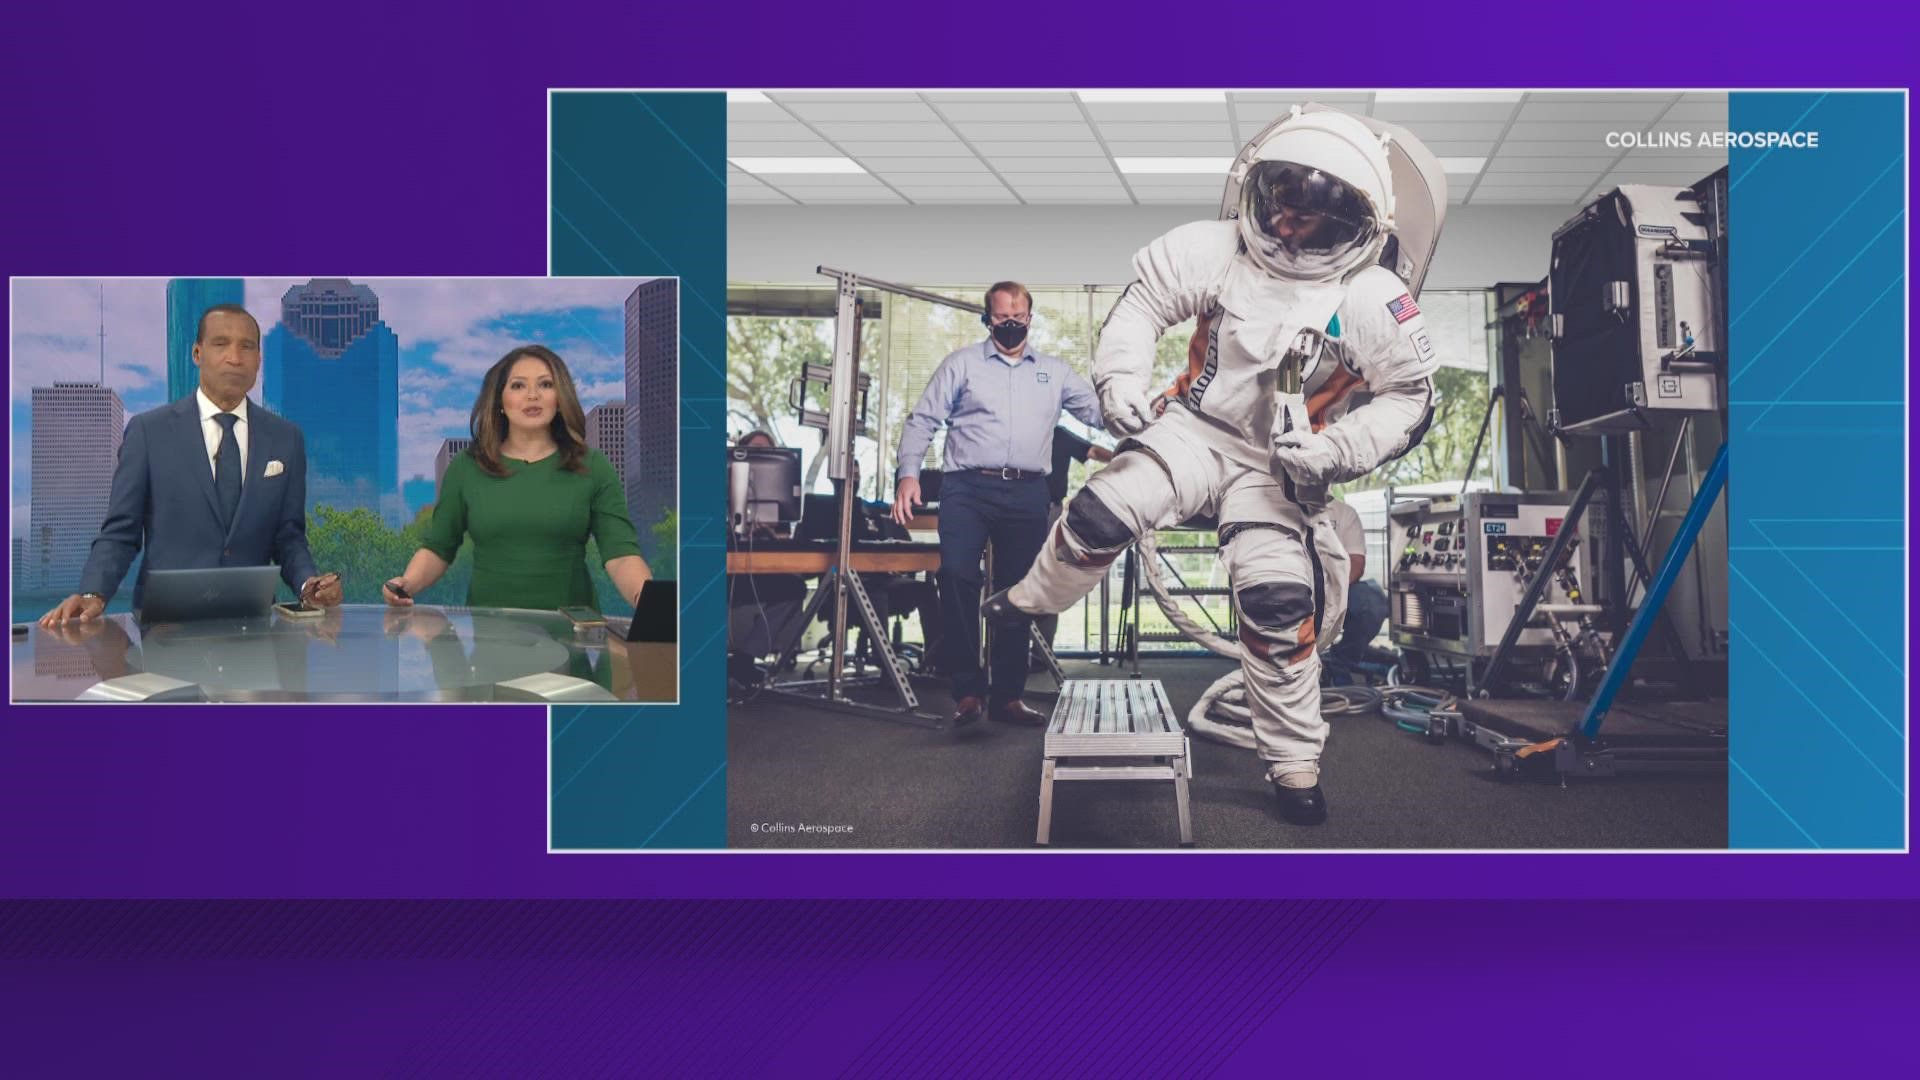 NASA is hoping the suits are ready for use in the next three years, which will be just in time for the first person of color and the first woman to walk on the moon.